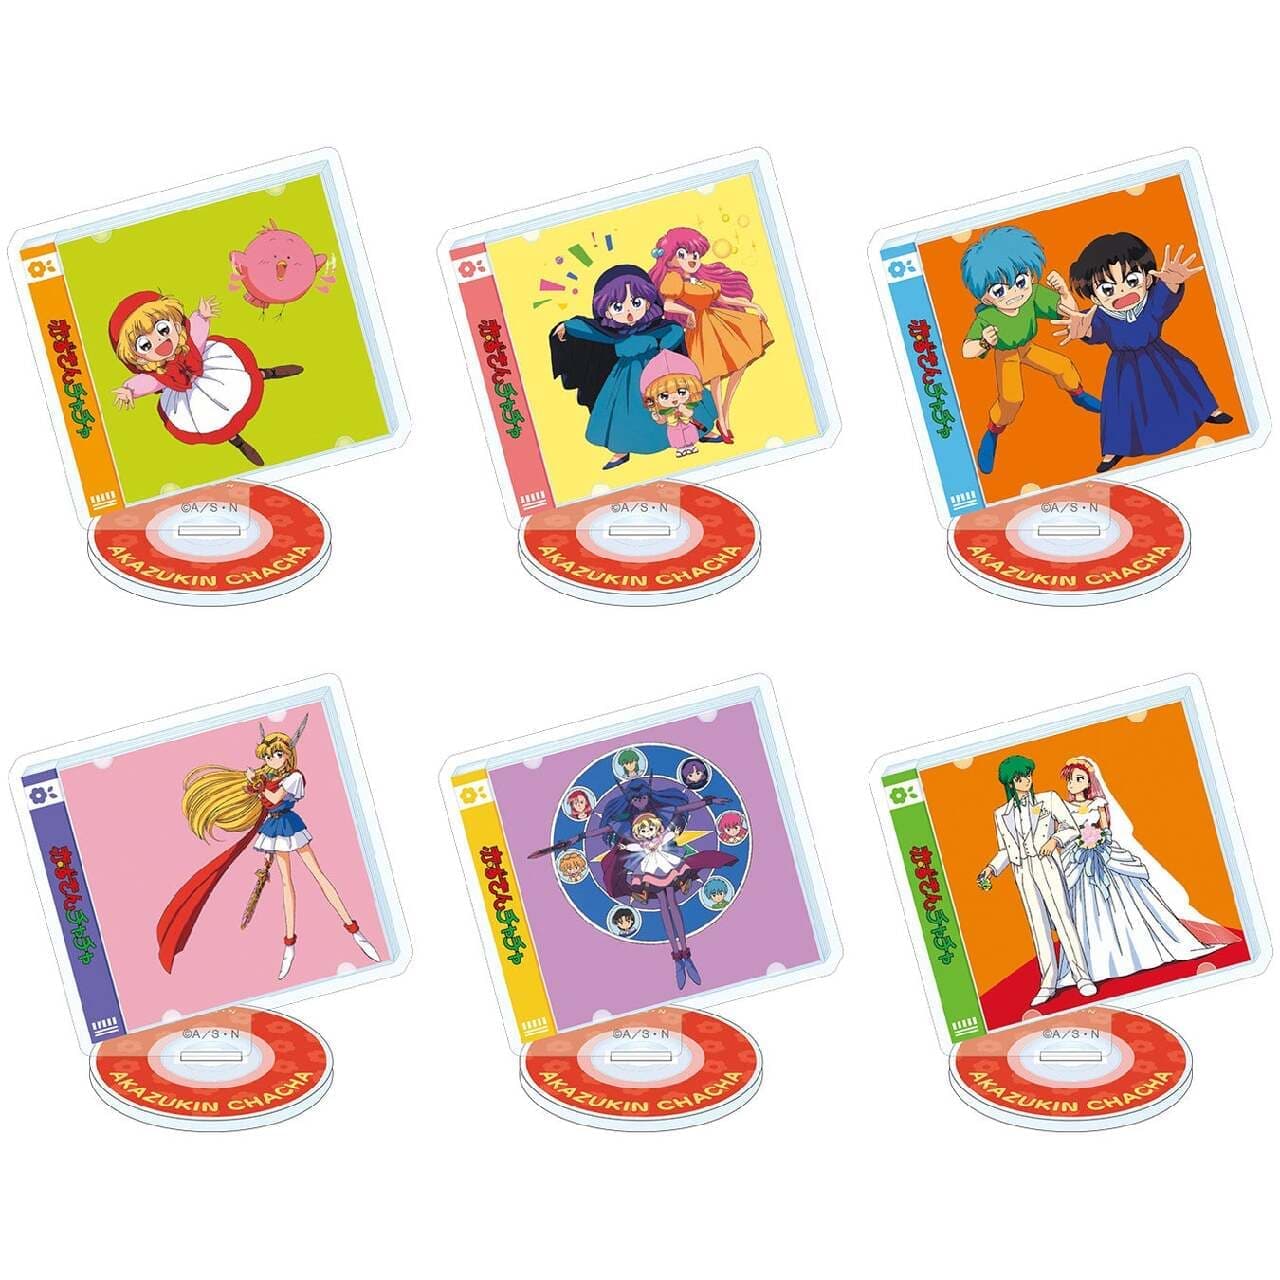 Movic has released a new product of “Akazukin Chacha”! Nostalgic items such as mini acrylic stands and mugs are now available at Village Vanguard Online Image 2